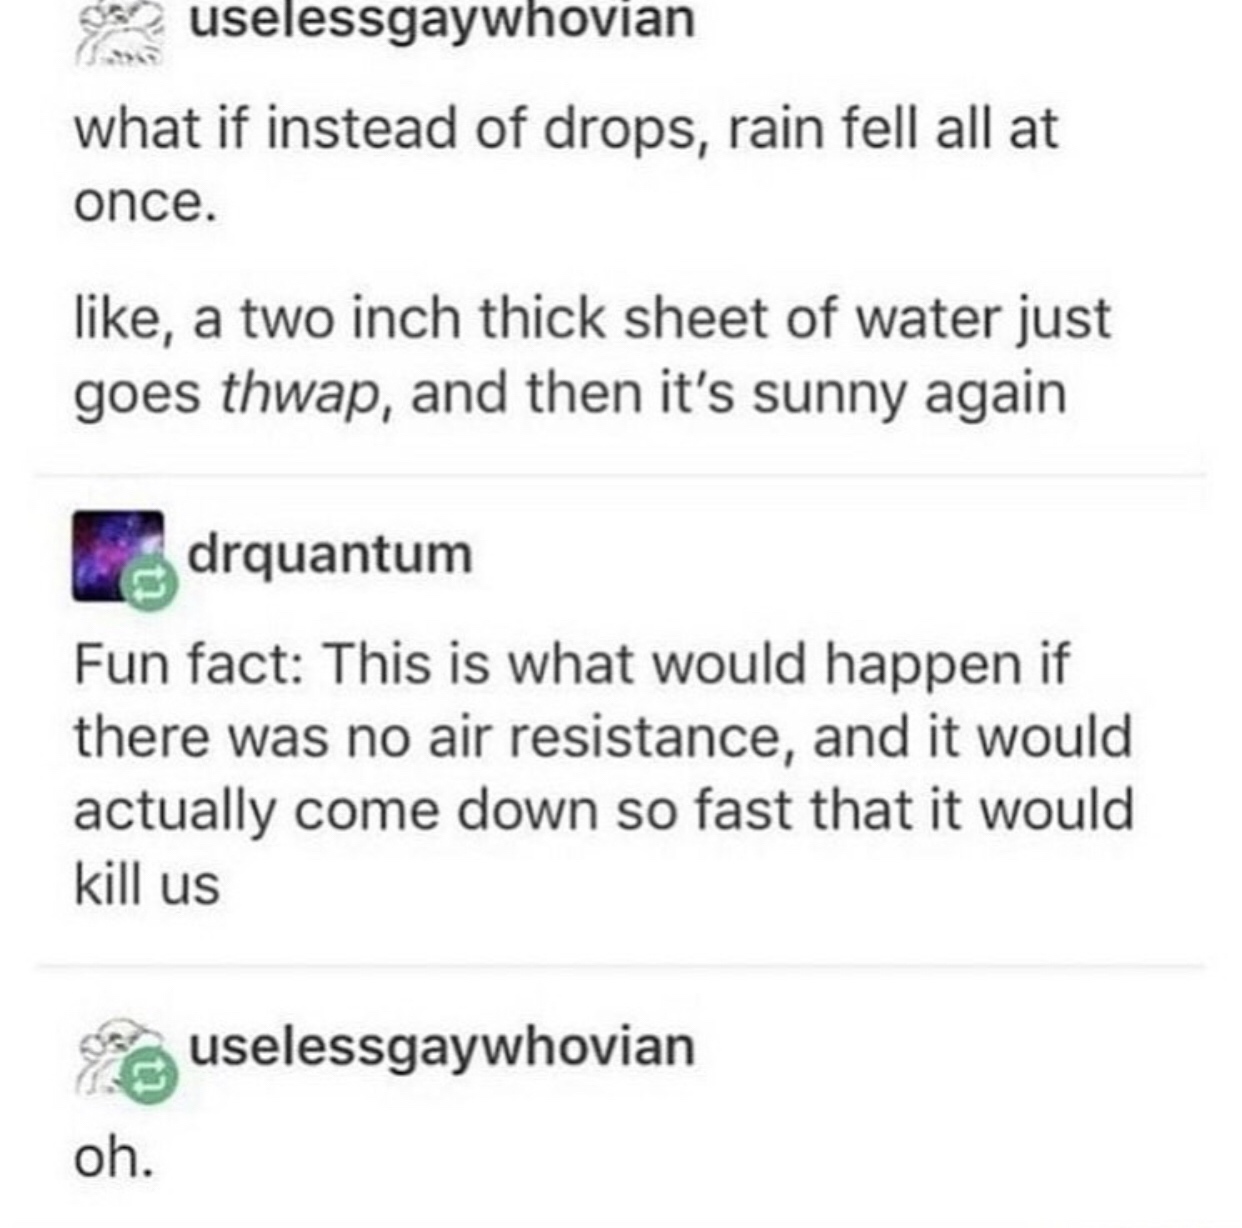 gay tumblr posts - uselessgaywhovian what if instead of drops, rain fell all at once. , a two inch thick sheet of water just goes thwap, and then it's sunny again drquantum Fun fact This is what would happen if there was no air resistance, and it would ac